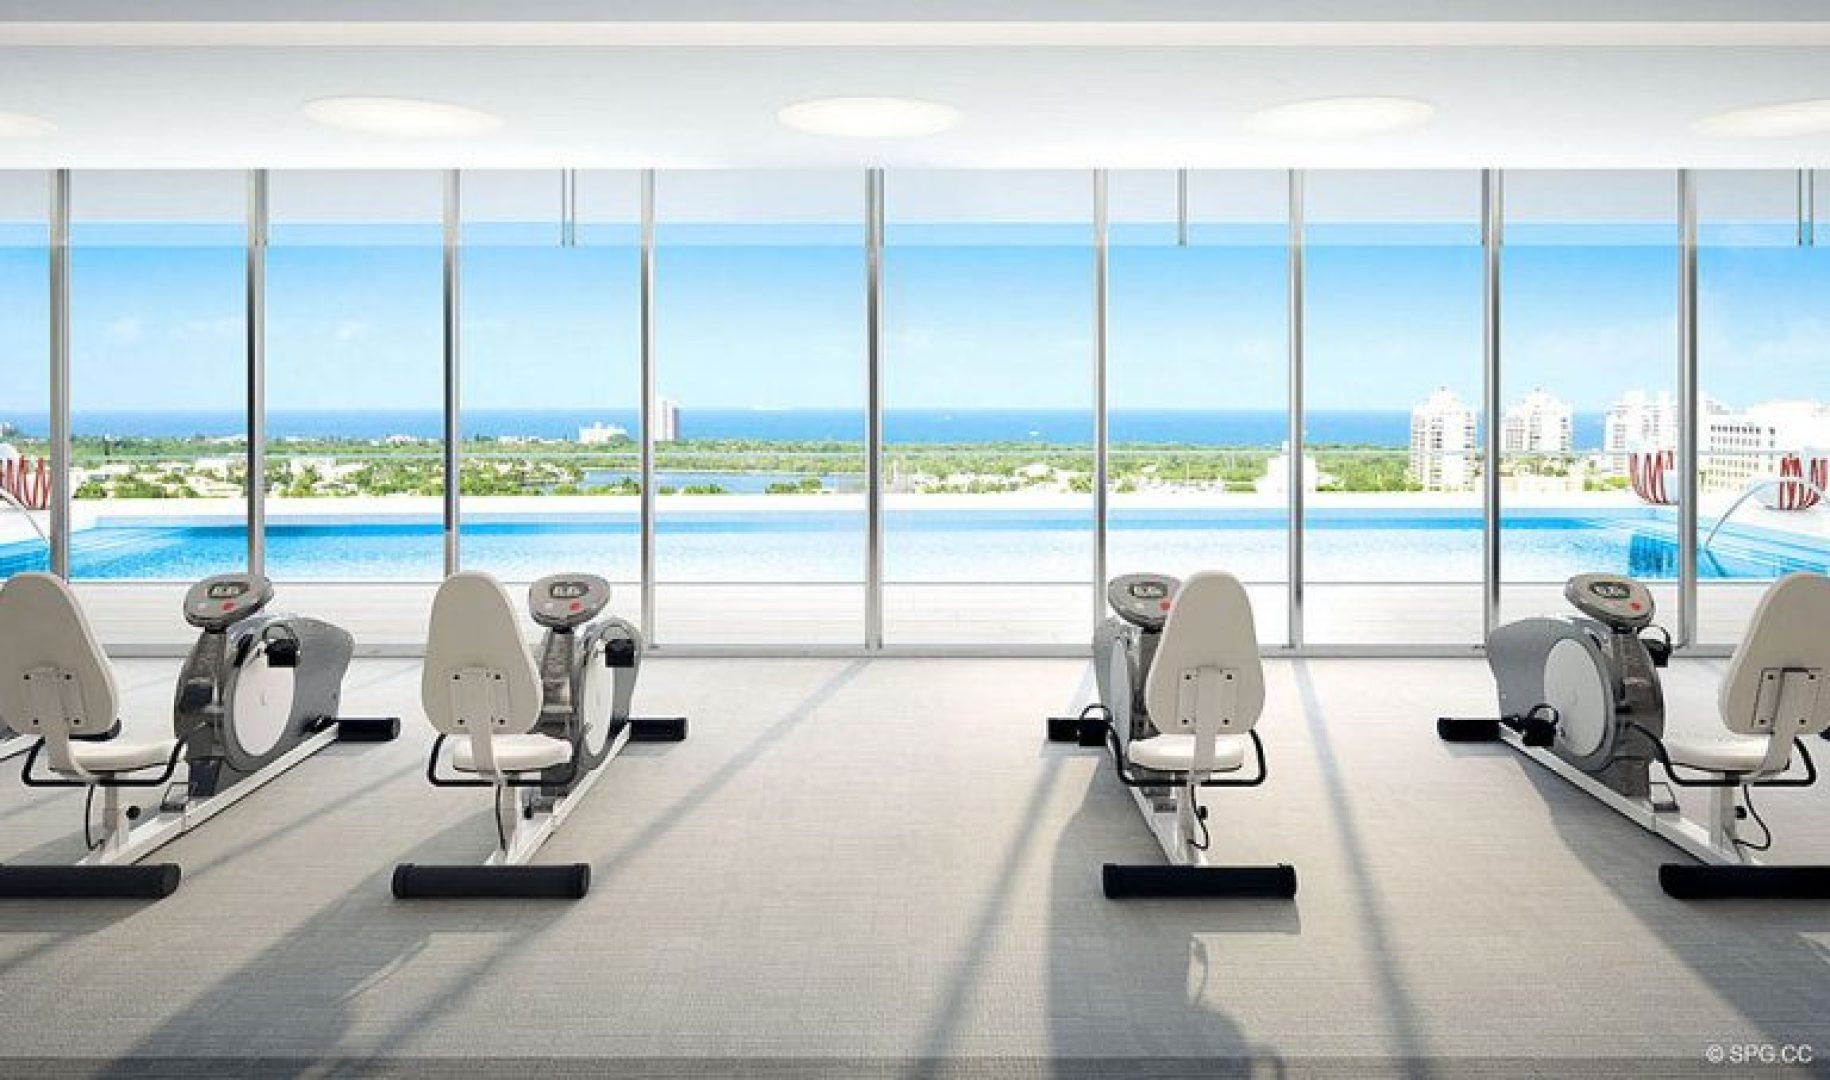 Waterfront Fitness Center Views at Riva, Luxury Waterfront Condos in Fort Lauderdale, Florida 33304.